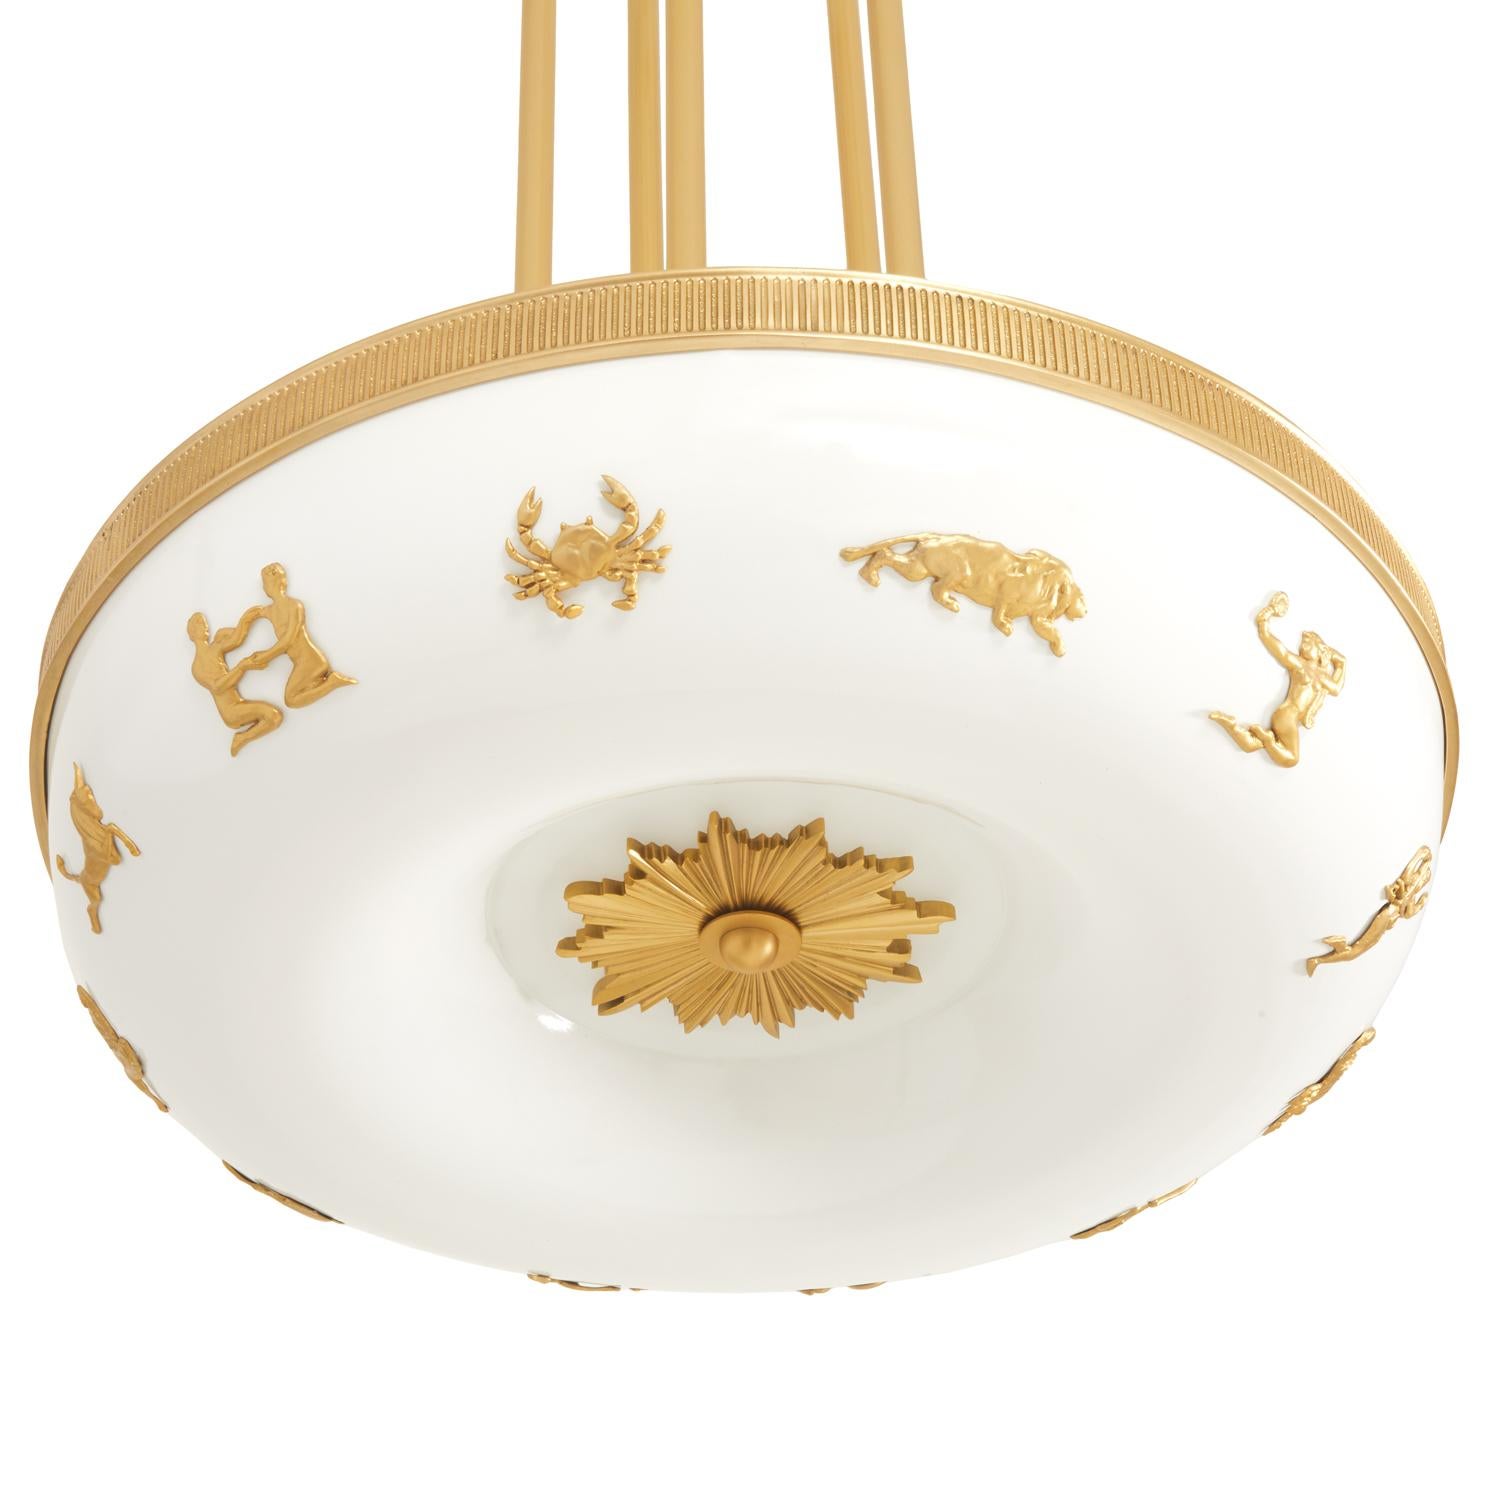 A Swedish Grace period inspired light with cast bronze zodiac signs. This fixture uses a frosted glass insert on the underside, and features a cast bronze sunburst with gold paint finish. Total of seven lights. The Zephyr Zodiac can be customized in